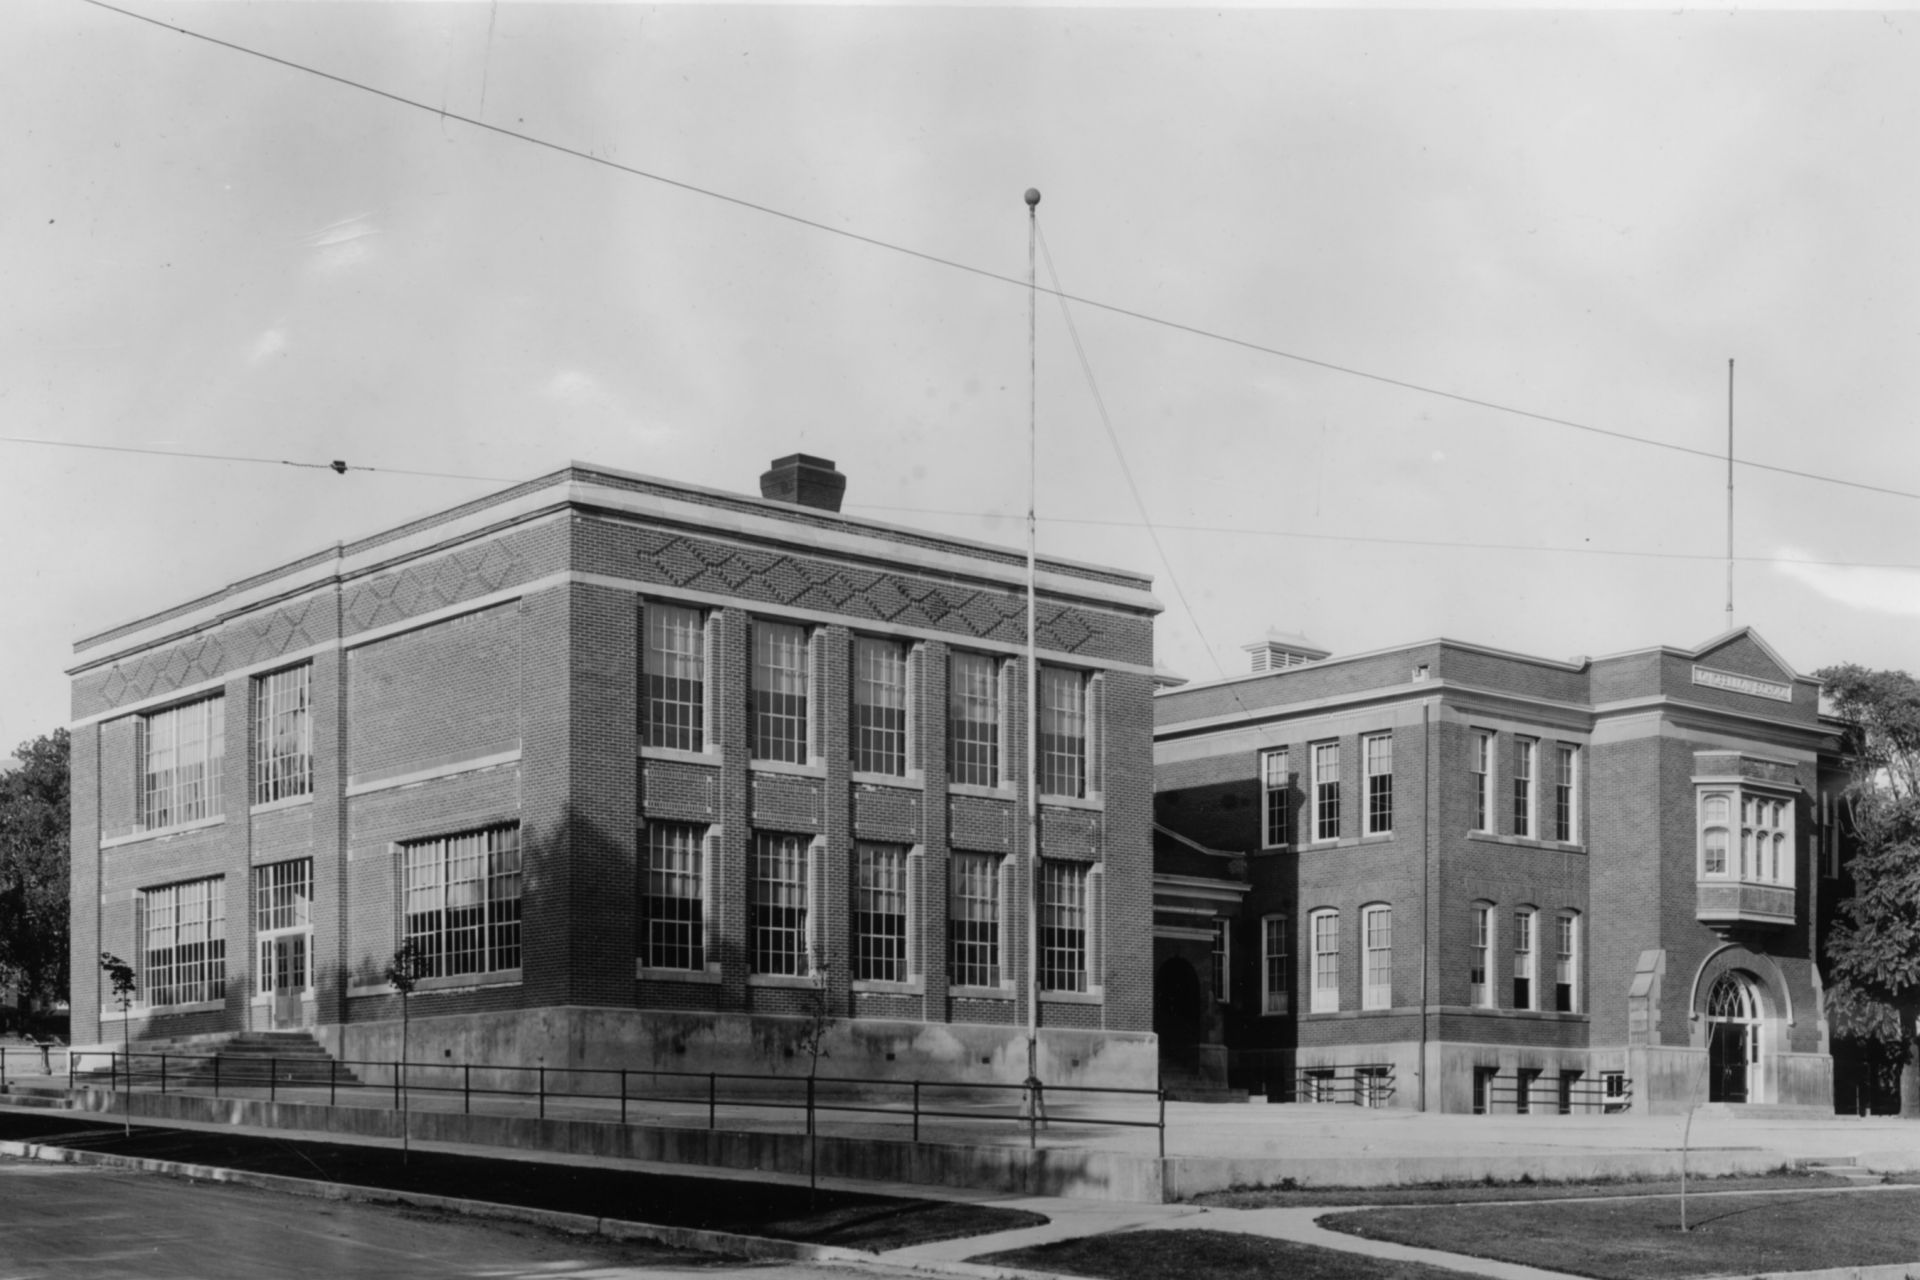 Old photograph of a school building